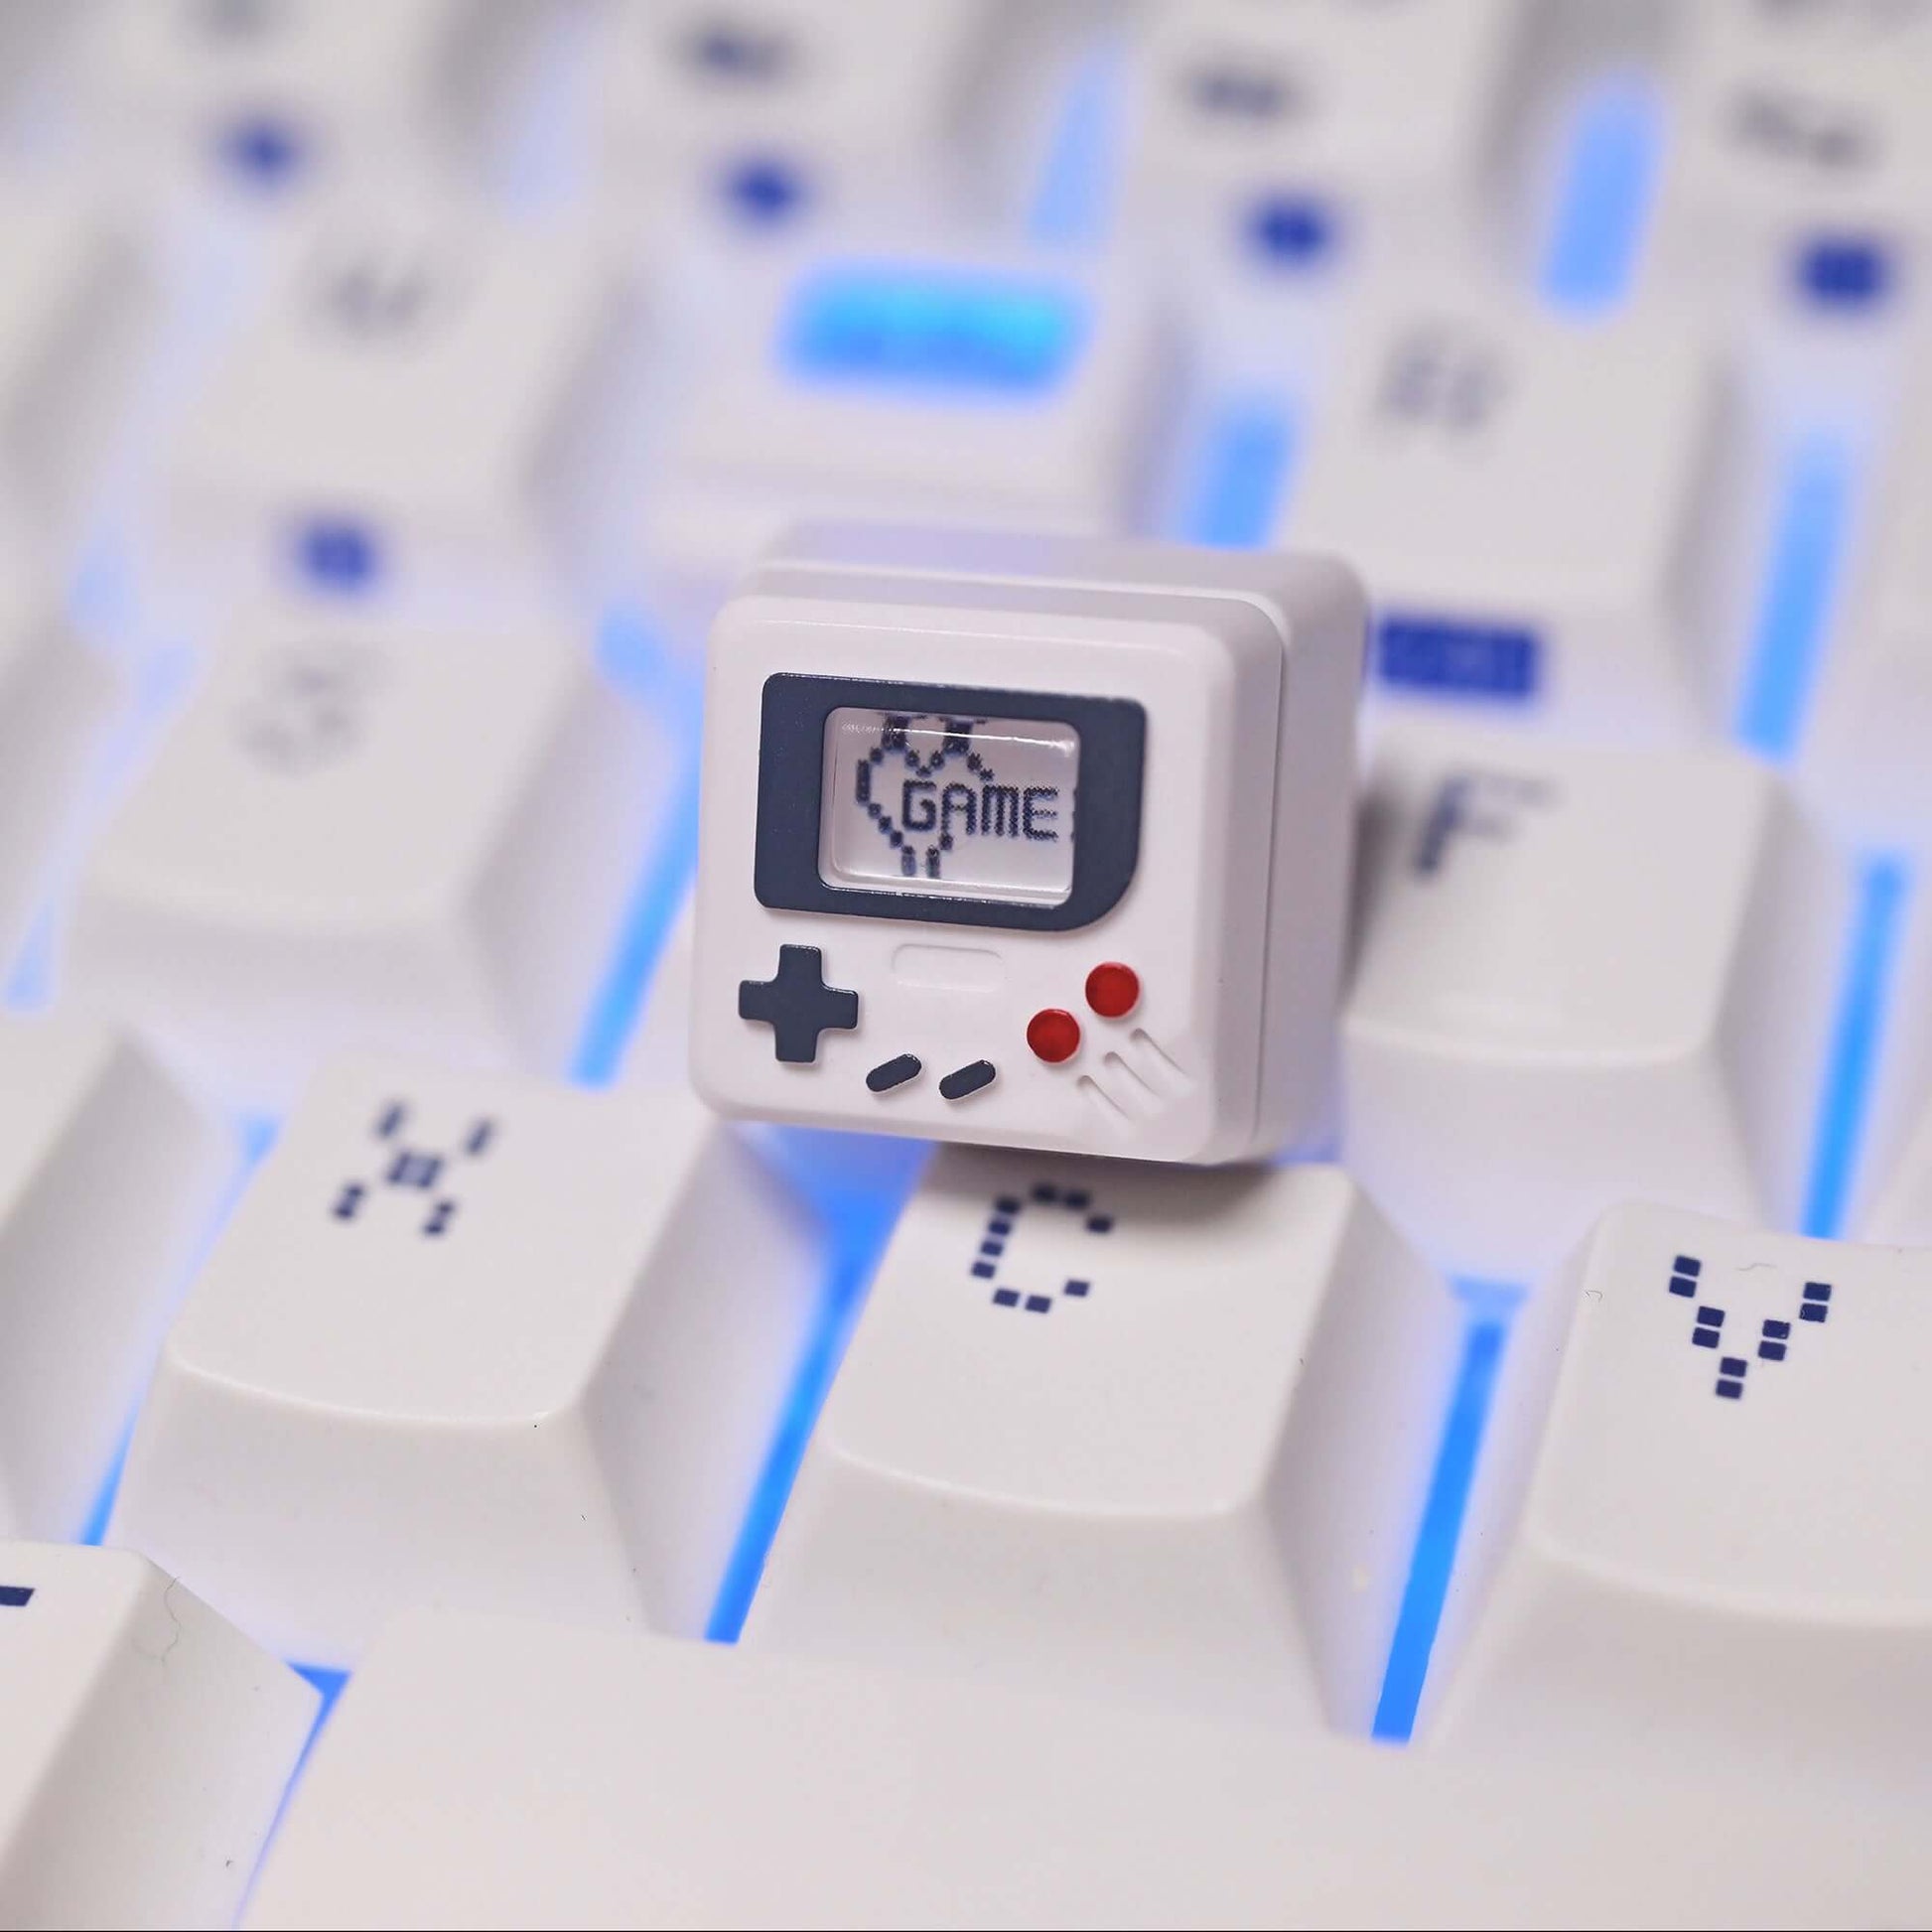 3 in 1 Retro Game Console Keycaps - EGGBOX TECH